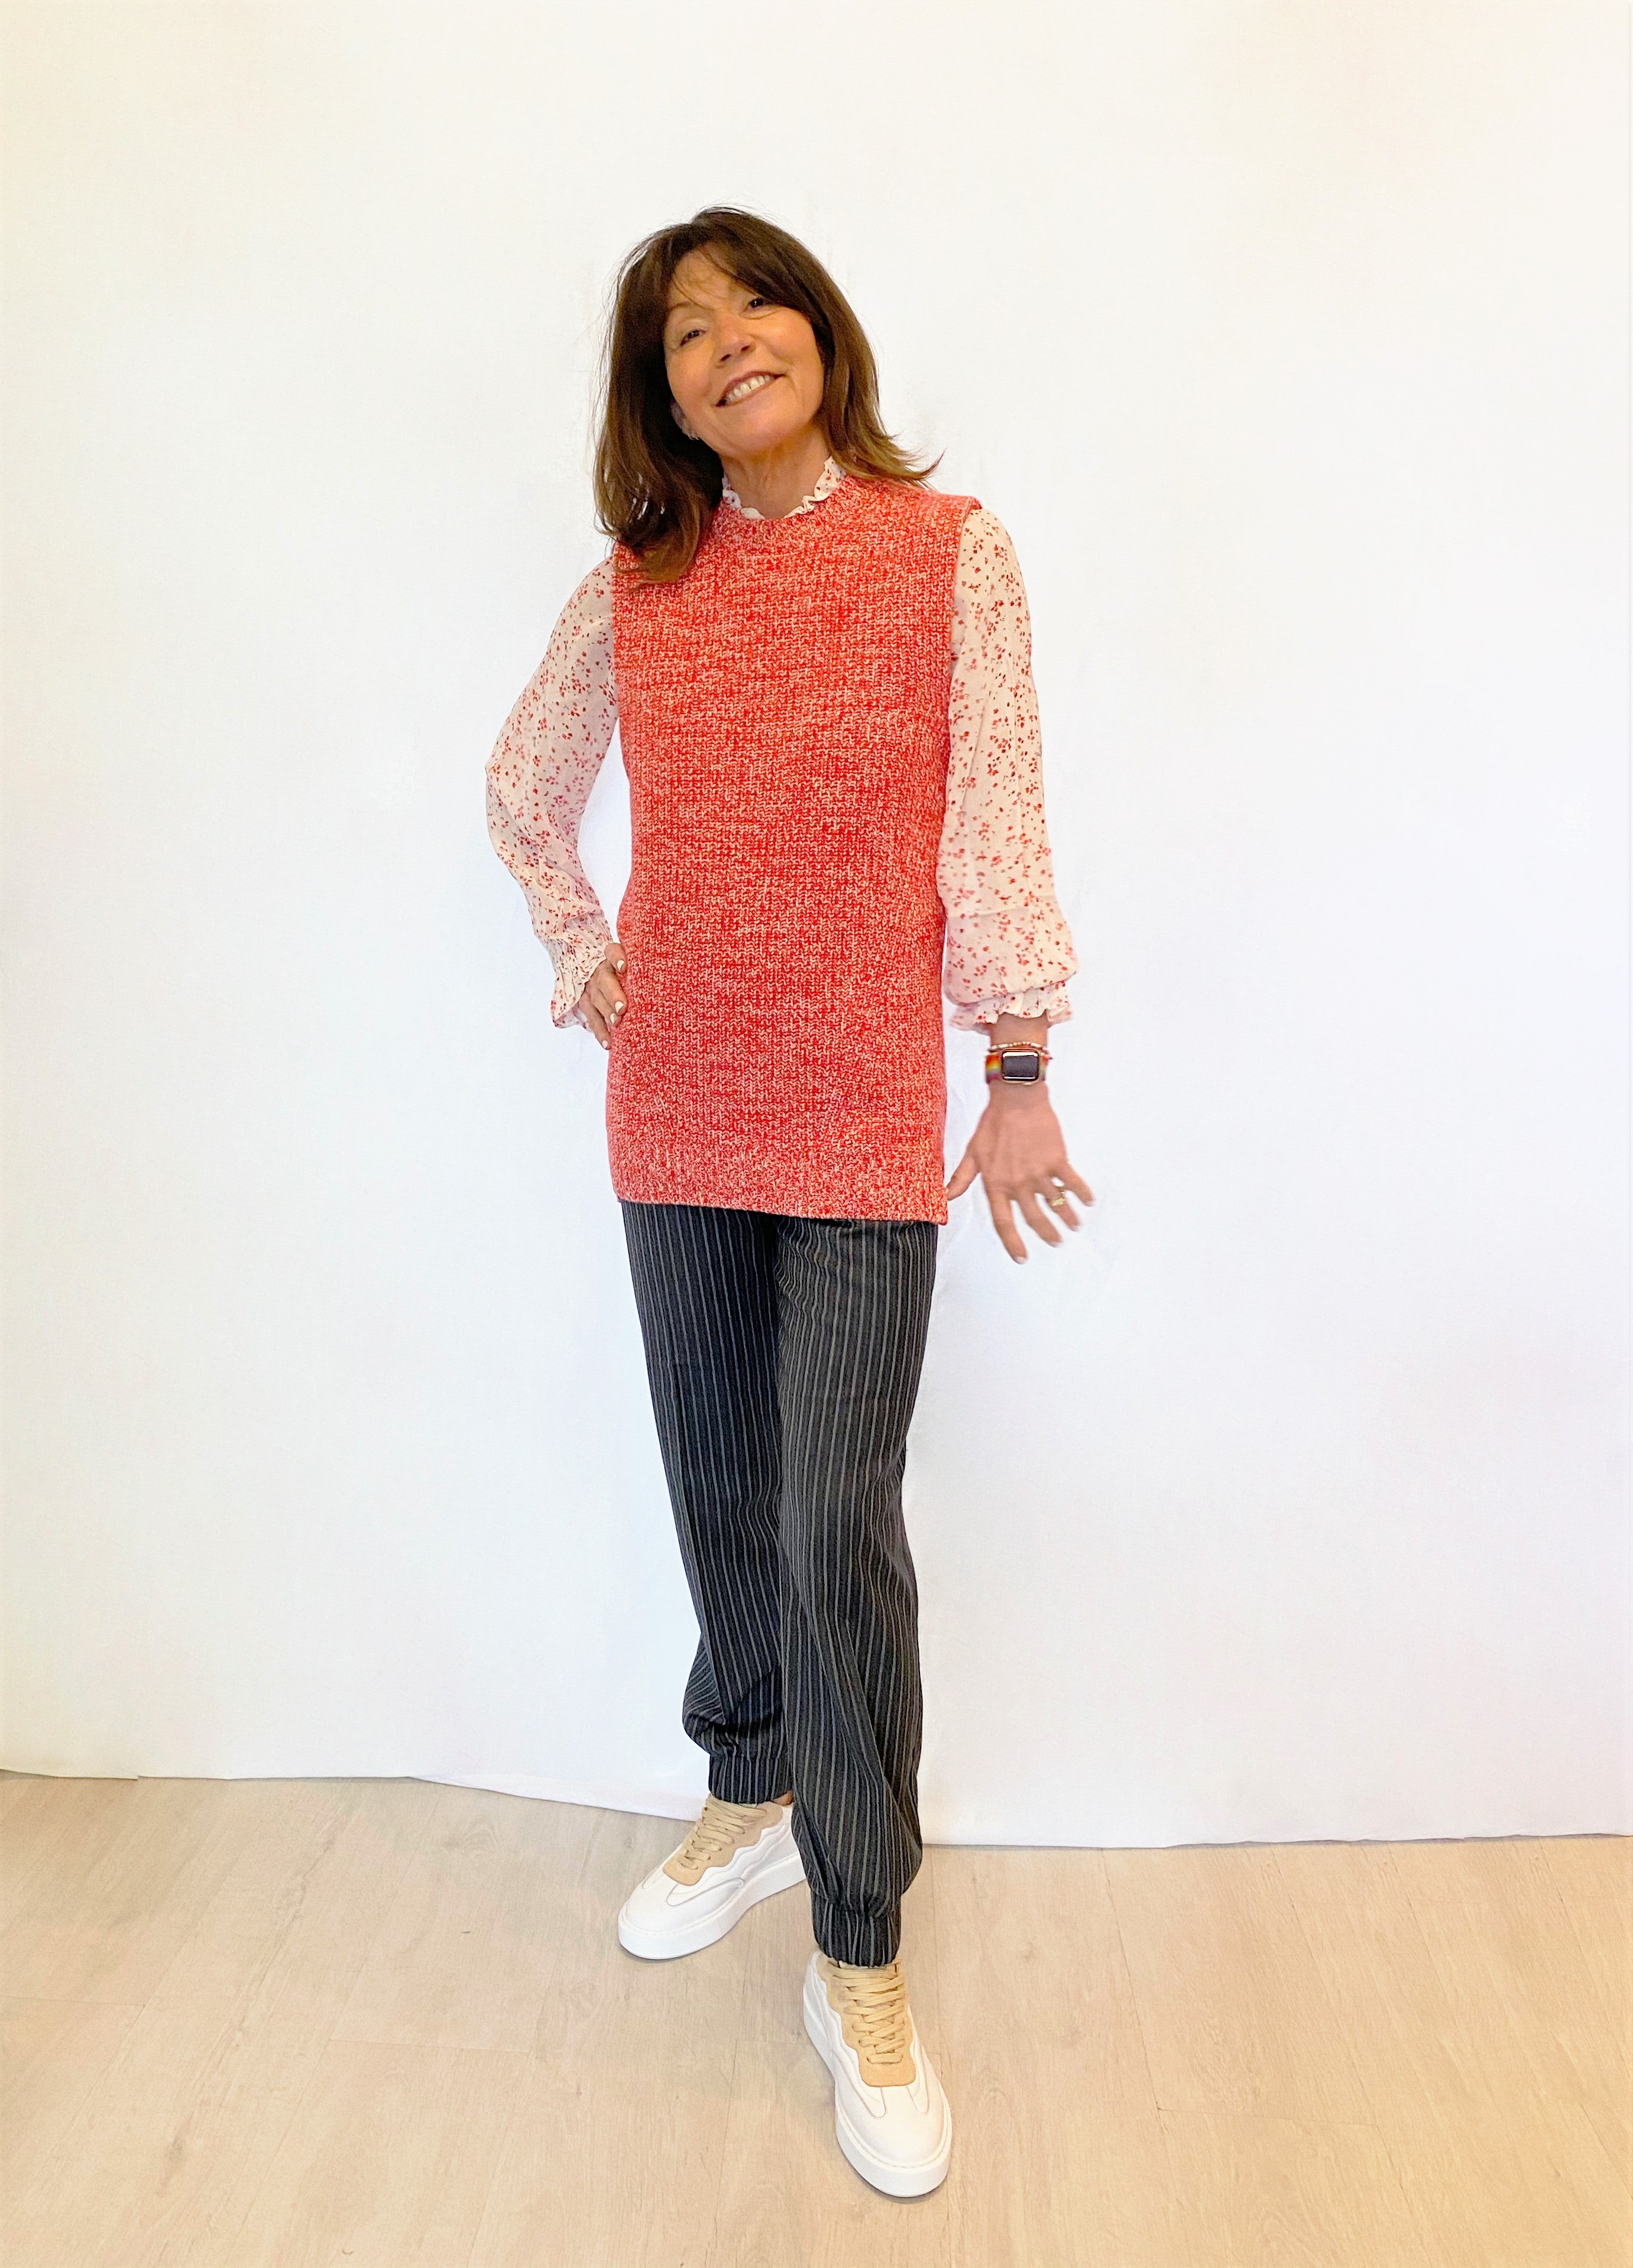 GANNI K1510 Cashmere Mix Knit in Flame